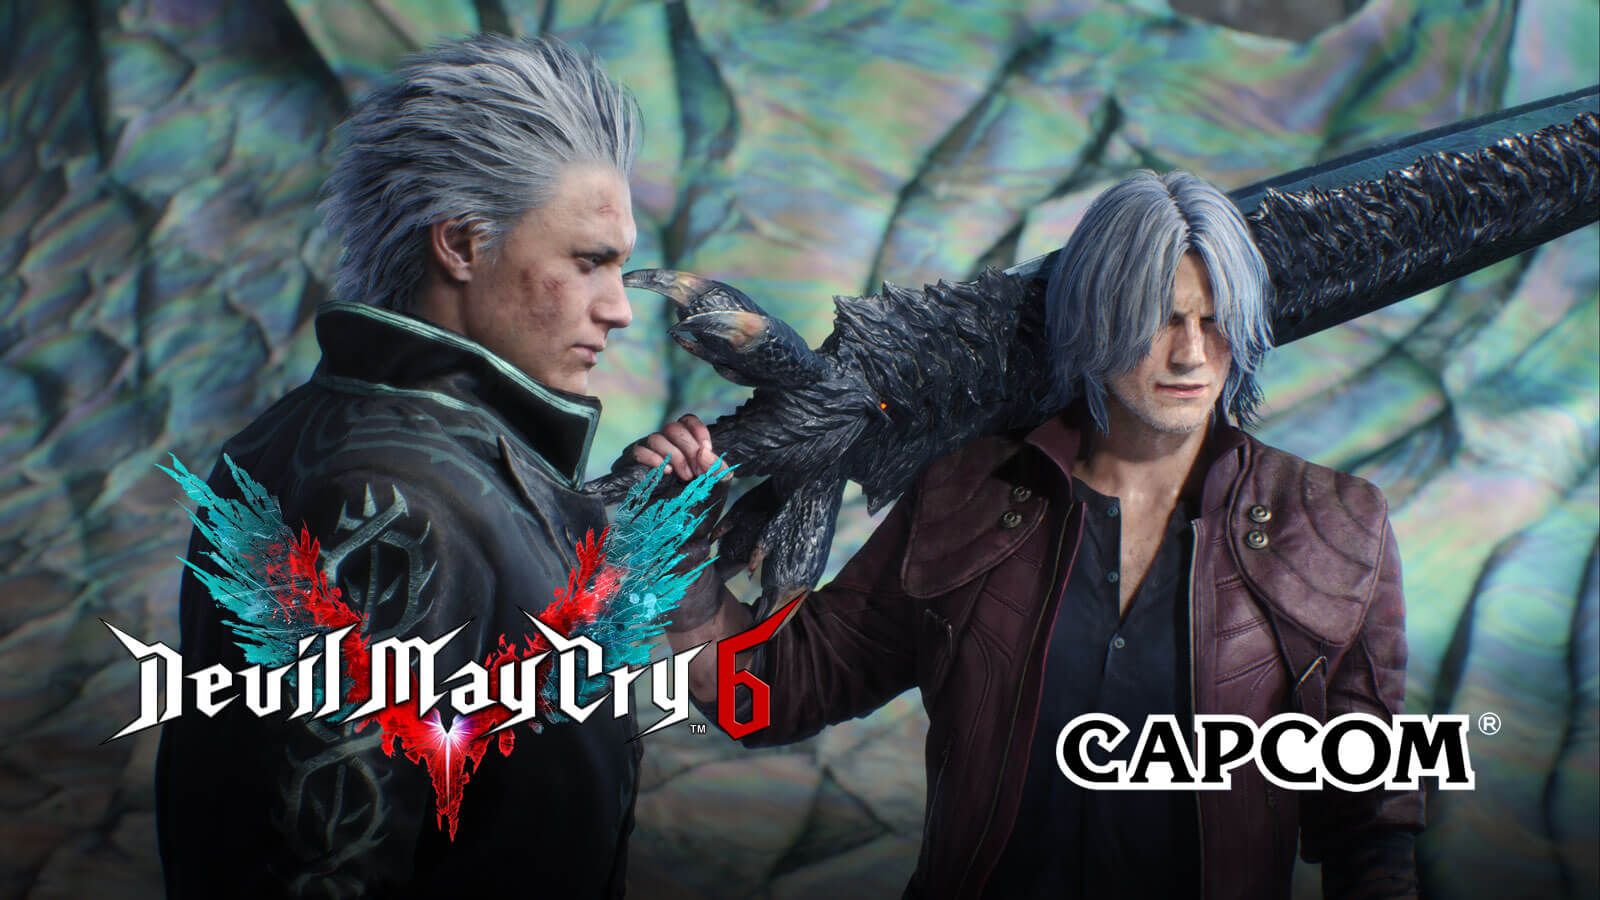 Did Capcom's Devil May Cry 6 hint their release? - DroidJournal